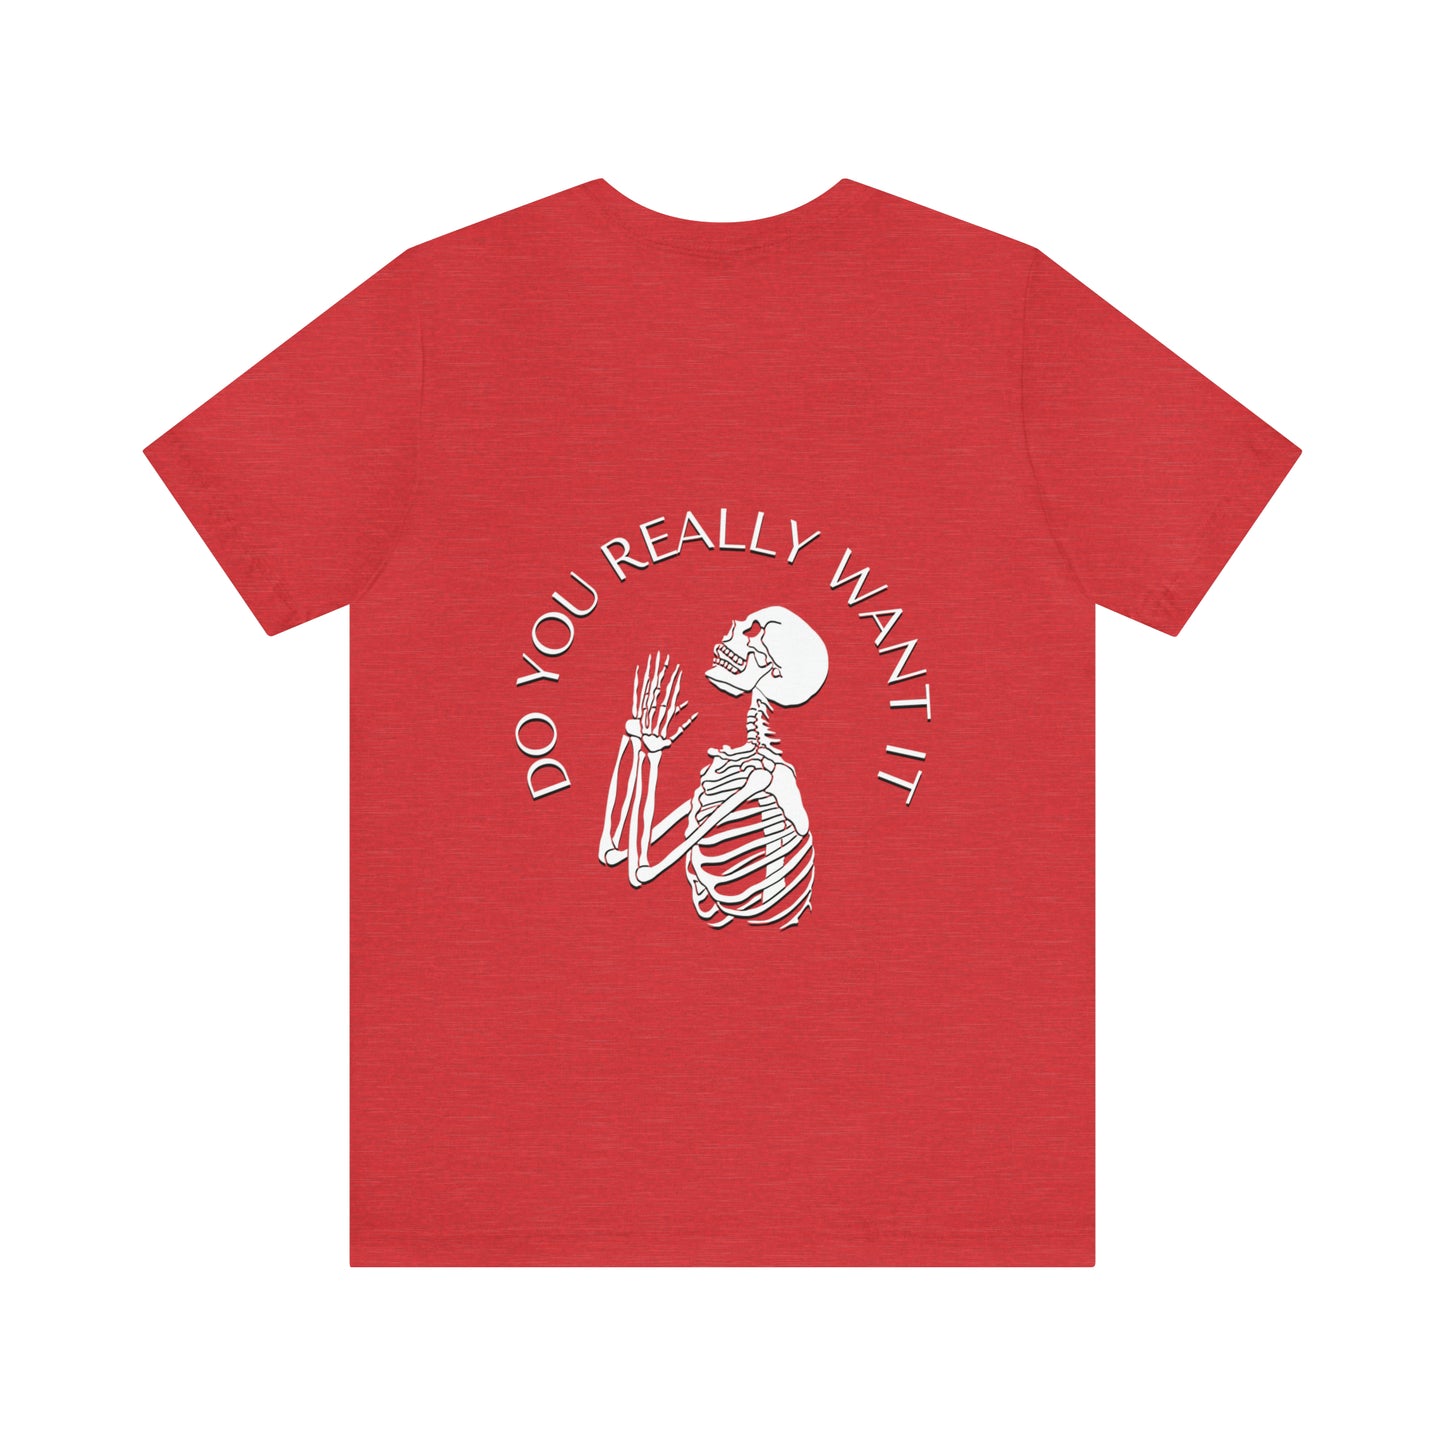 Do You Really Want It Skeleton T-Shirt